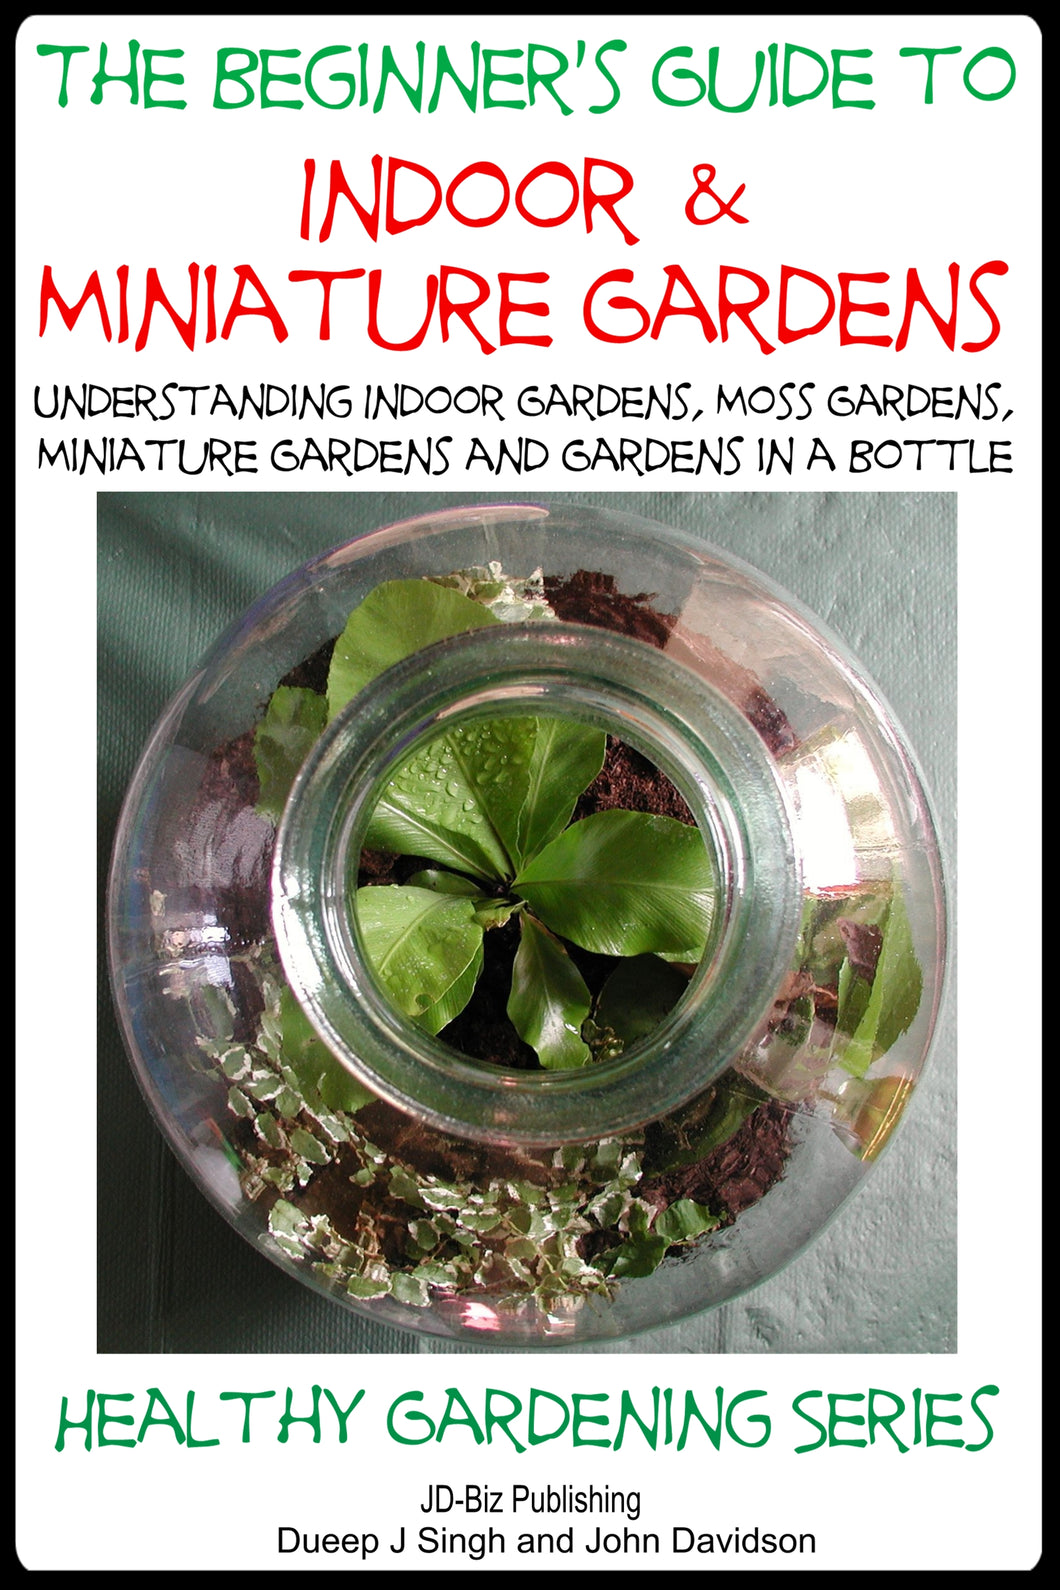 The Beginner’s Guide to Indoor and Miniature Gardens